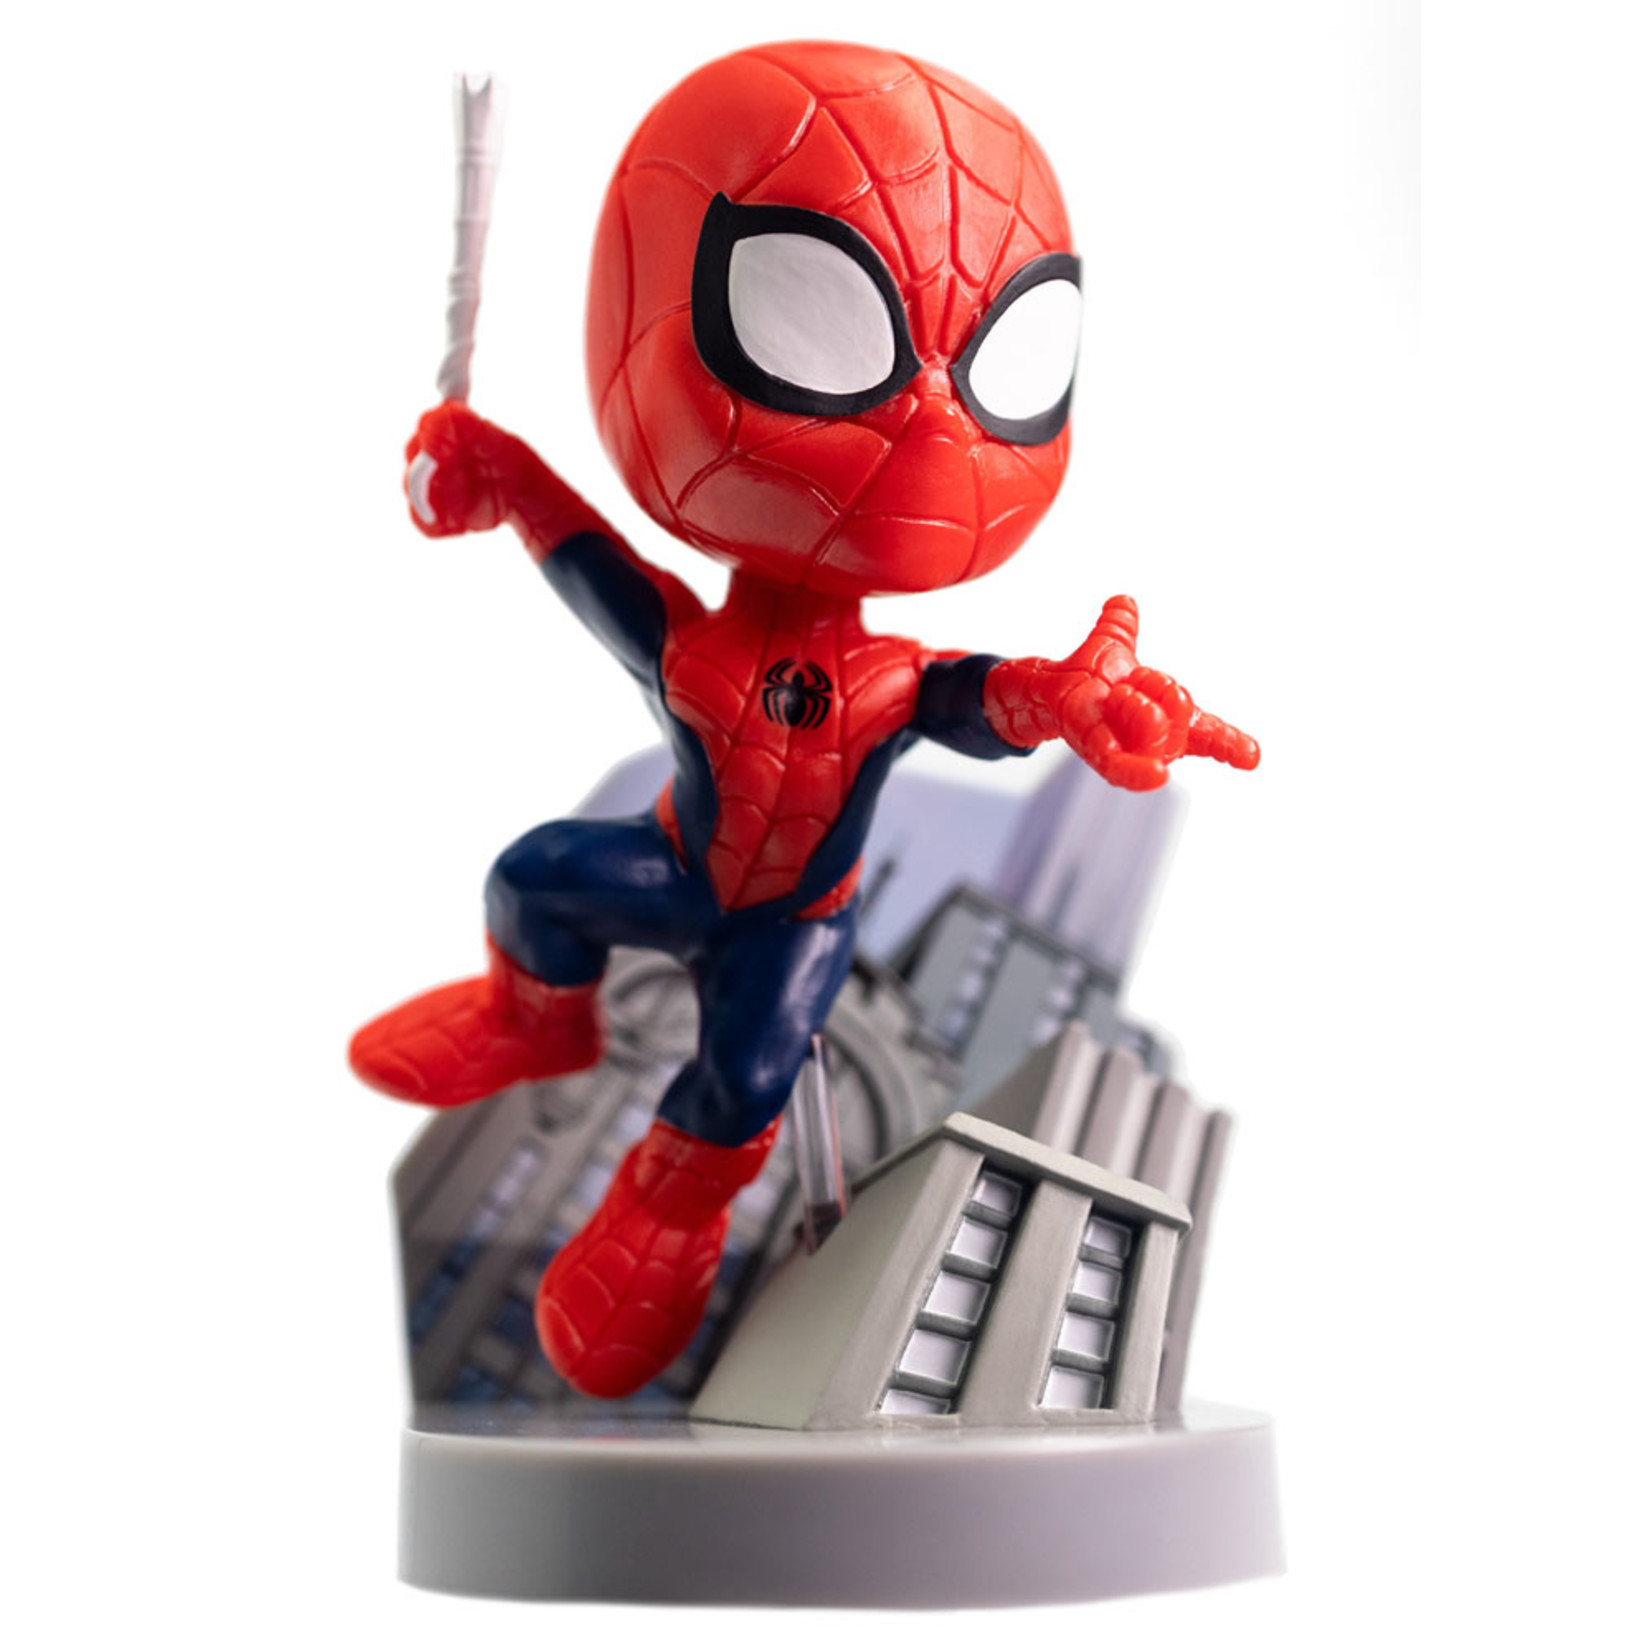 The Loyal Subjects The Loyal Subjects Marvel Superama Spider-Man